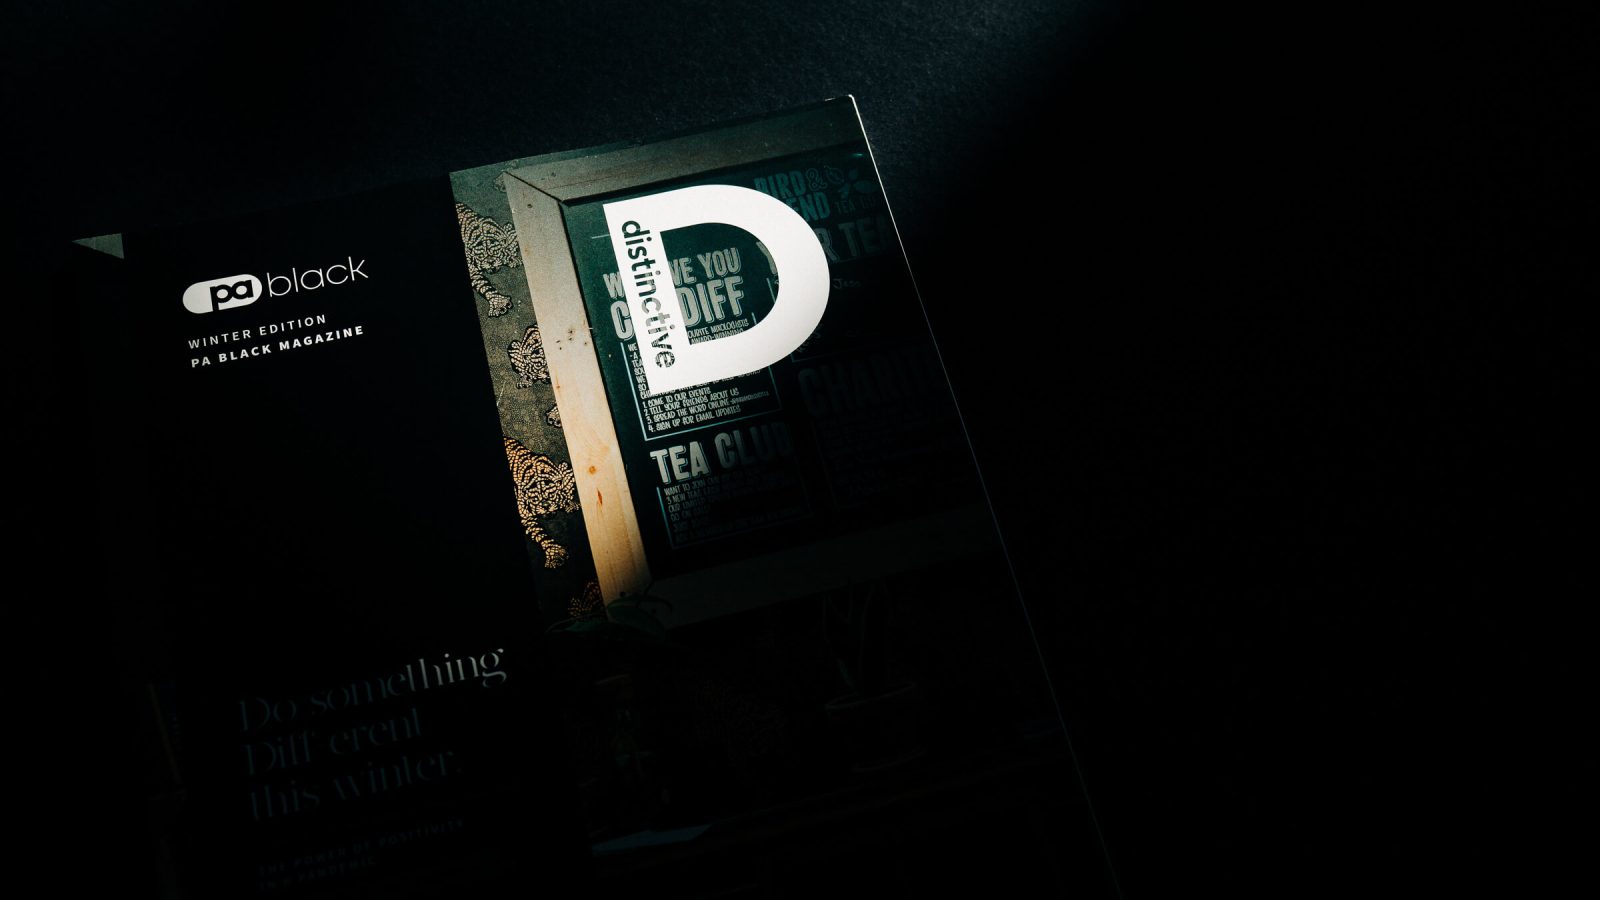 A magazine partially illuminated by sunlight with a visible page that shows an advertisement featuring the text 